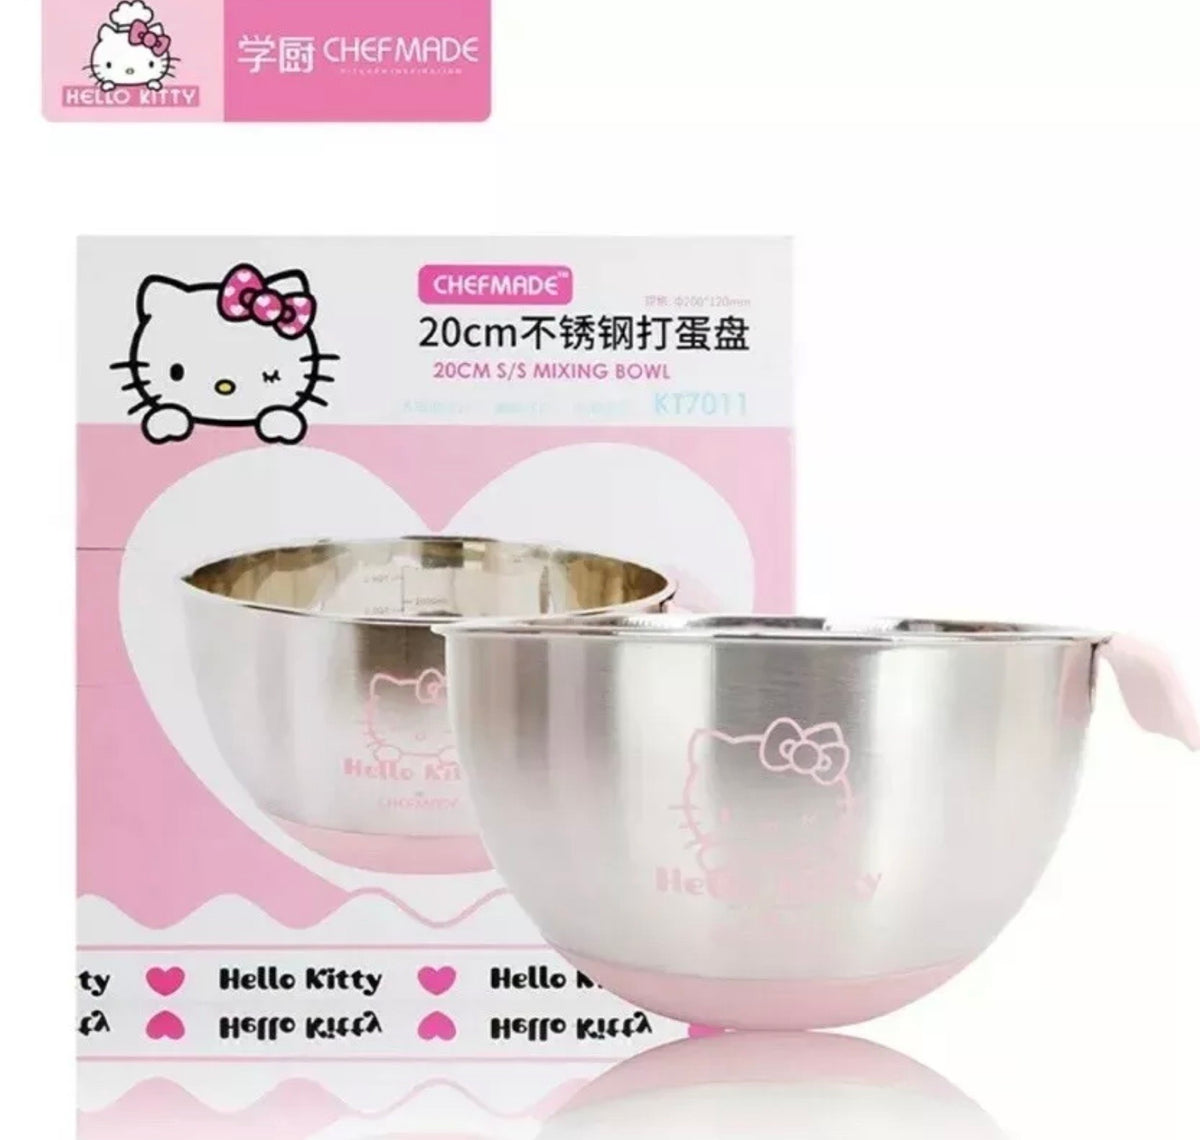 CHEFMADE Hello Kitty Pink Electric Hand Mixer – Accessory Lane